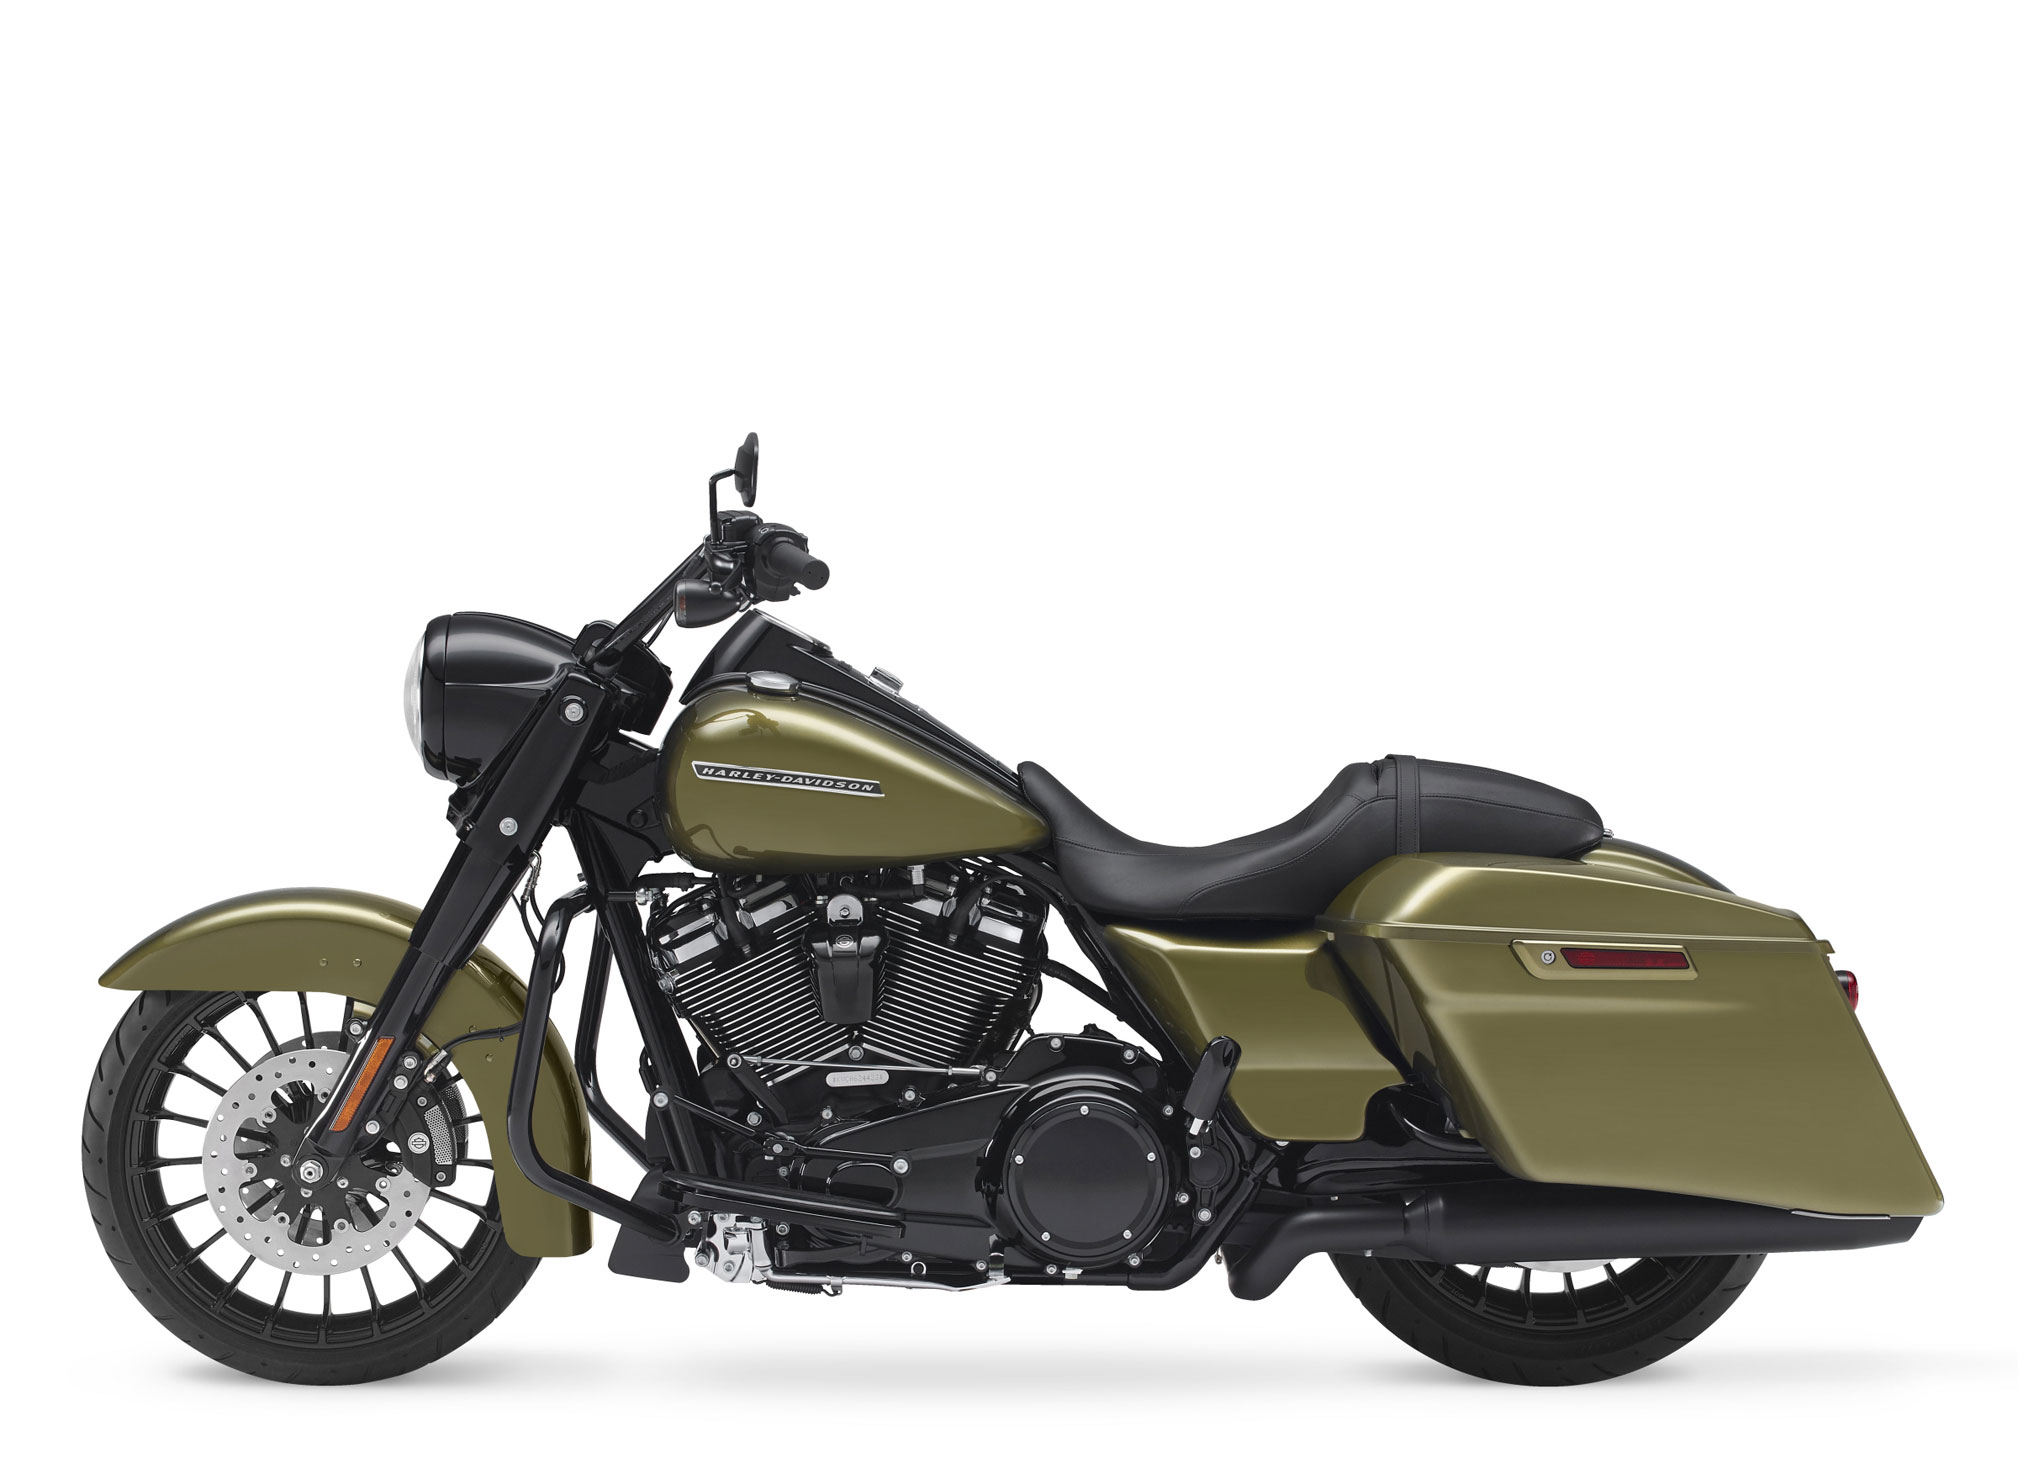 2018 Harley Davidson Road King Special Review Total Motorcycle